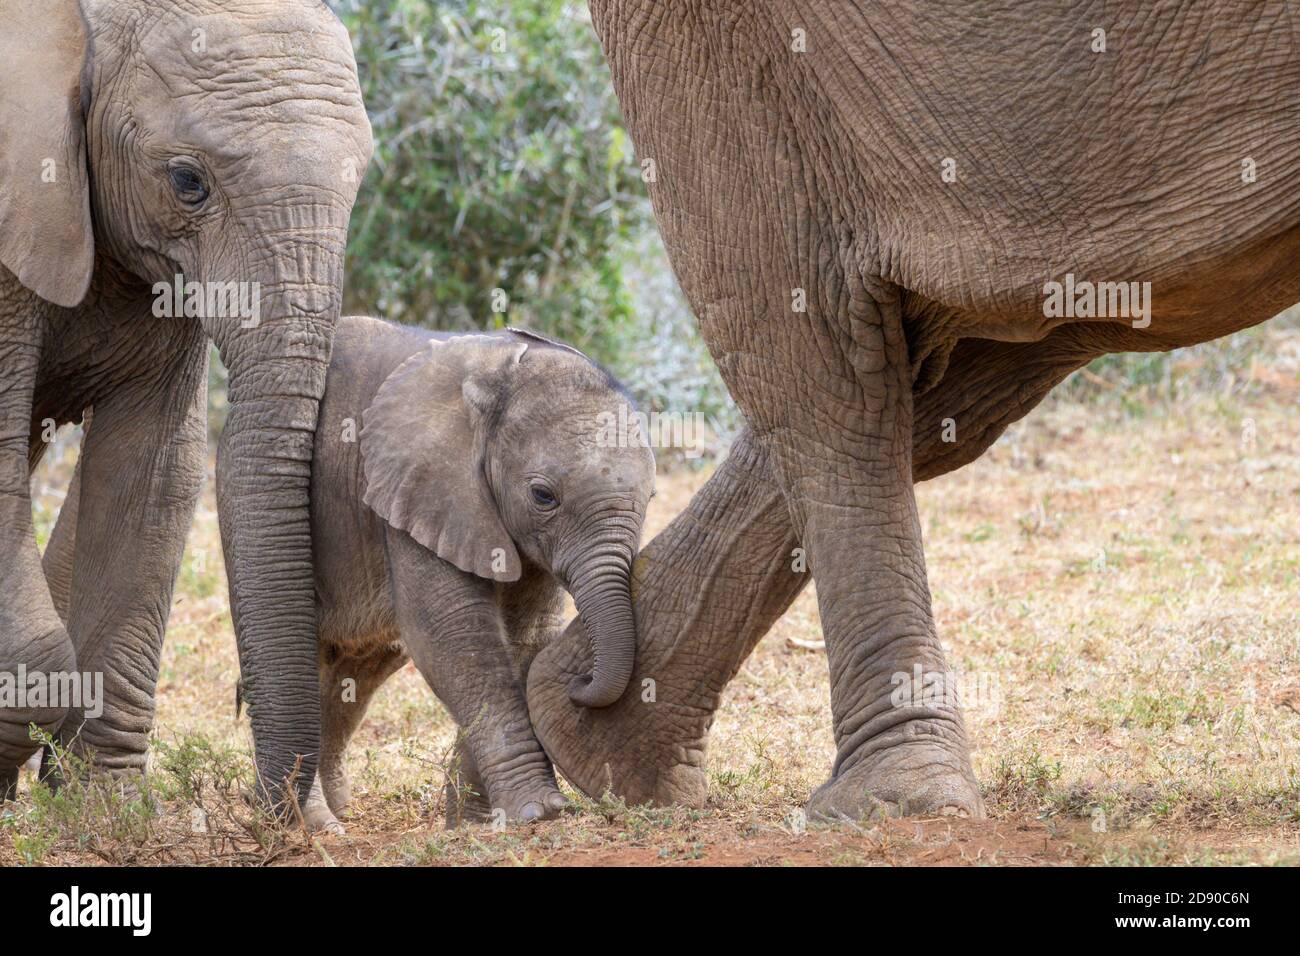 African elephant (Loxodonta africana) young calf walking in herd behind mother, Addo Elephant National Park, Eastern Cape, South Africa. Stock Photo